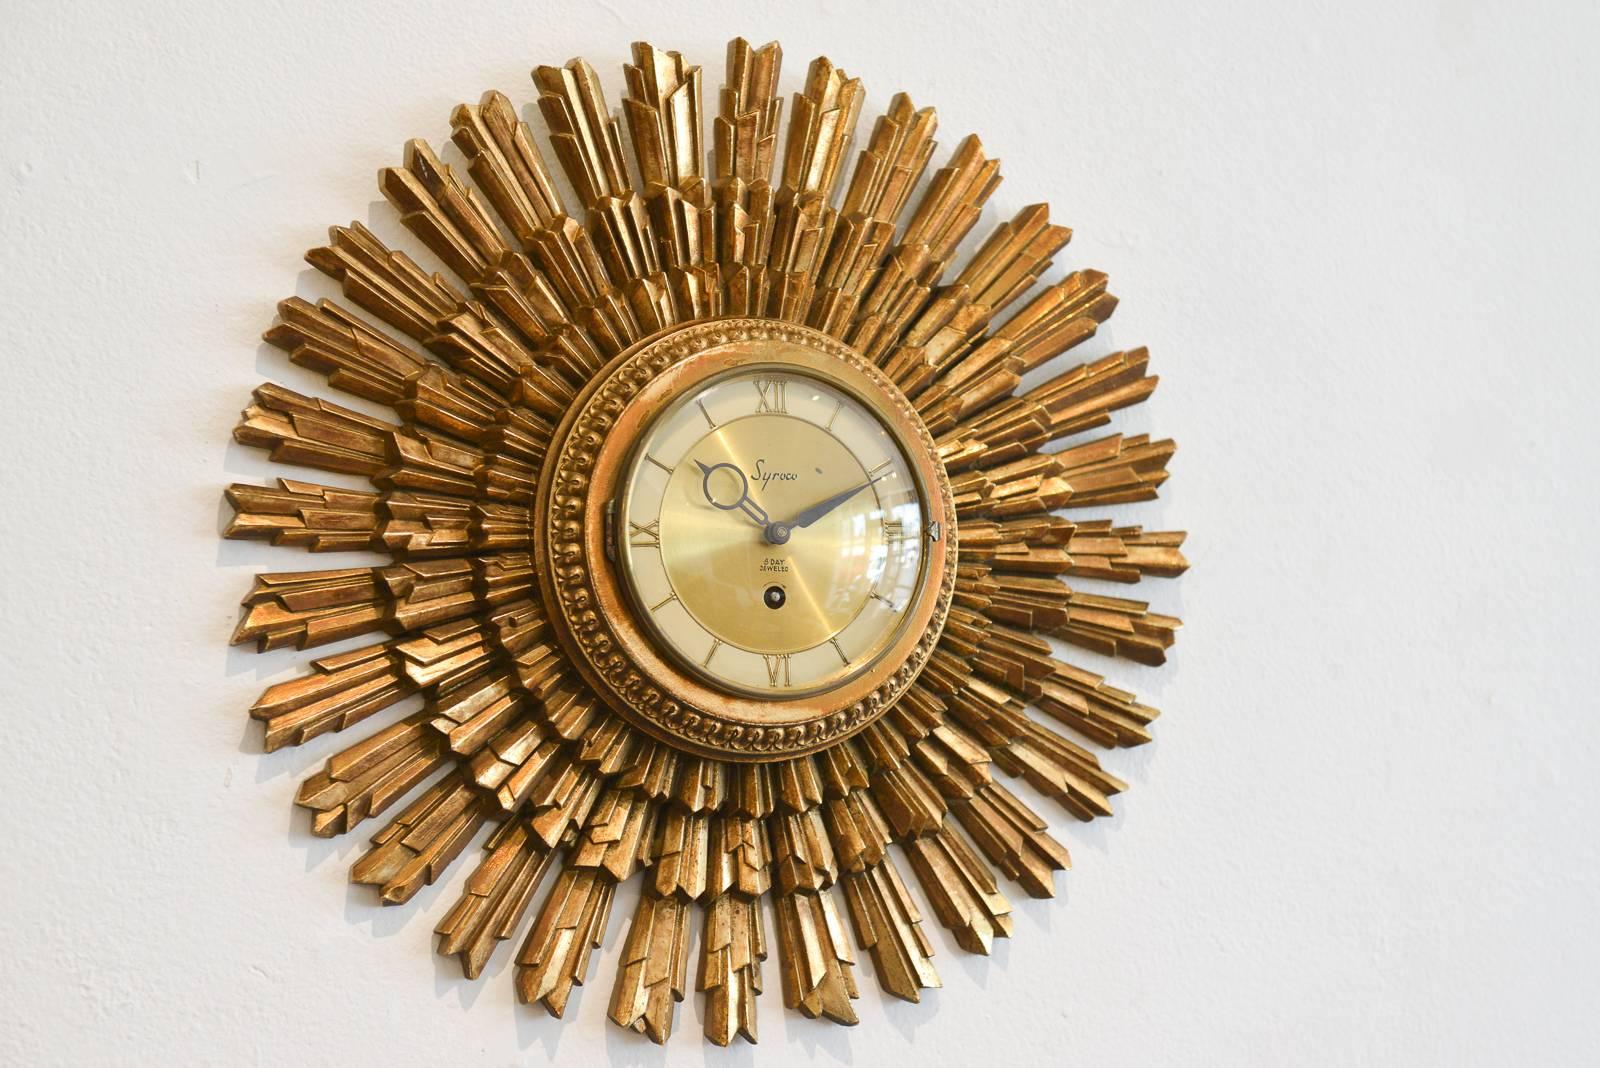 Gold gilt sunburst clock by Syroco Wood of Syracuse, NY, circa 1955 with original key wind mechanism, hour and minute hands and domed glass cover. 8 day jeweled movement.

Excellent vintage condition, works perfectly keeps excellent time. Does not